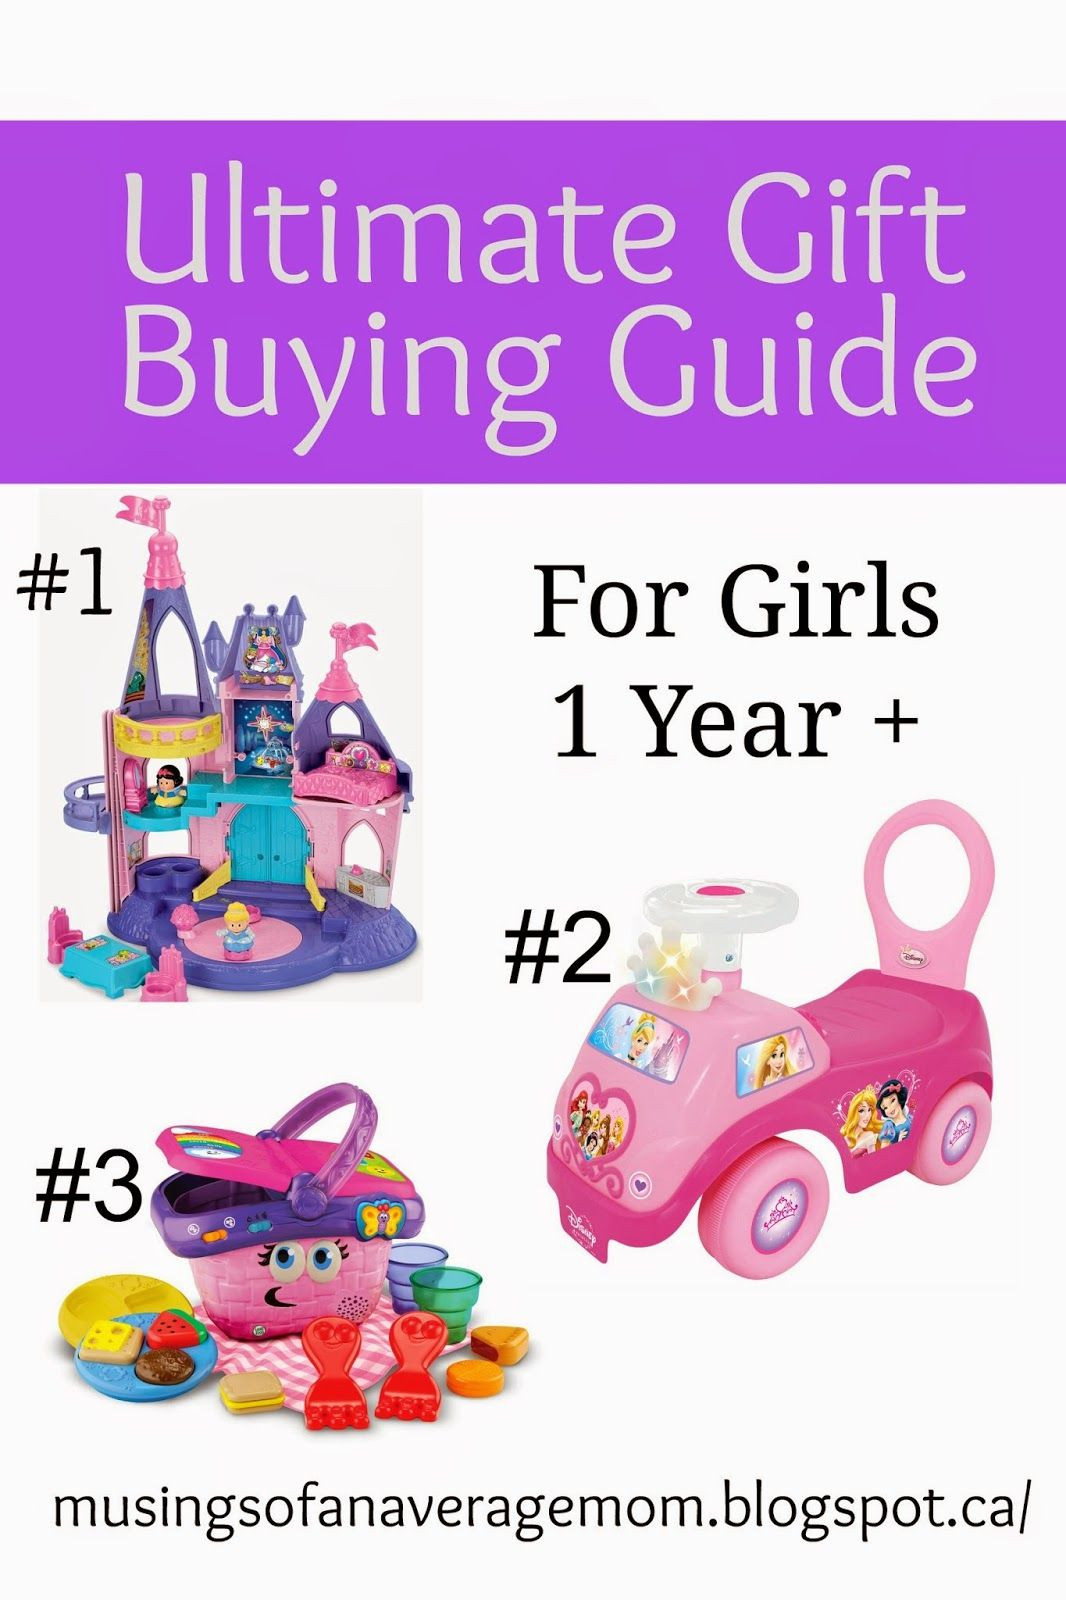 Gift Ideas For 1 Year Old Girls
 Ultimate Gift Buying Guide Great Gift Ideas for e Year